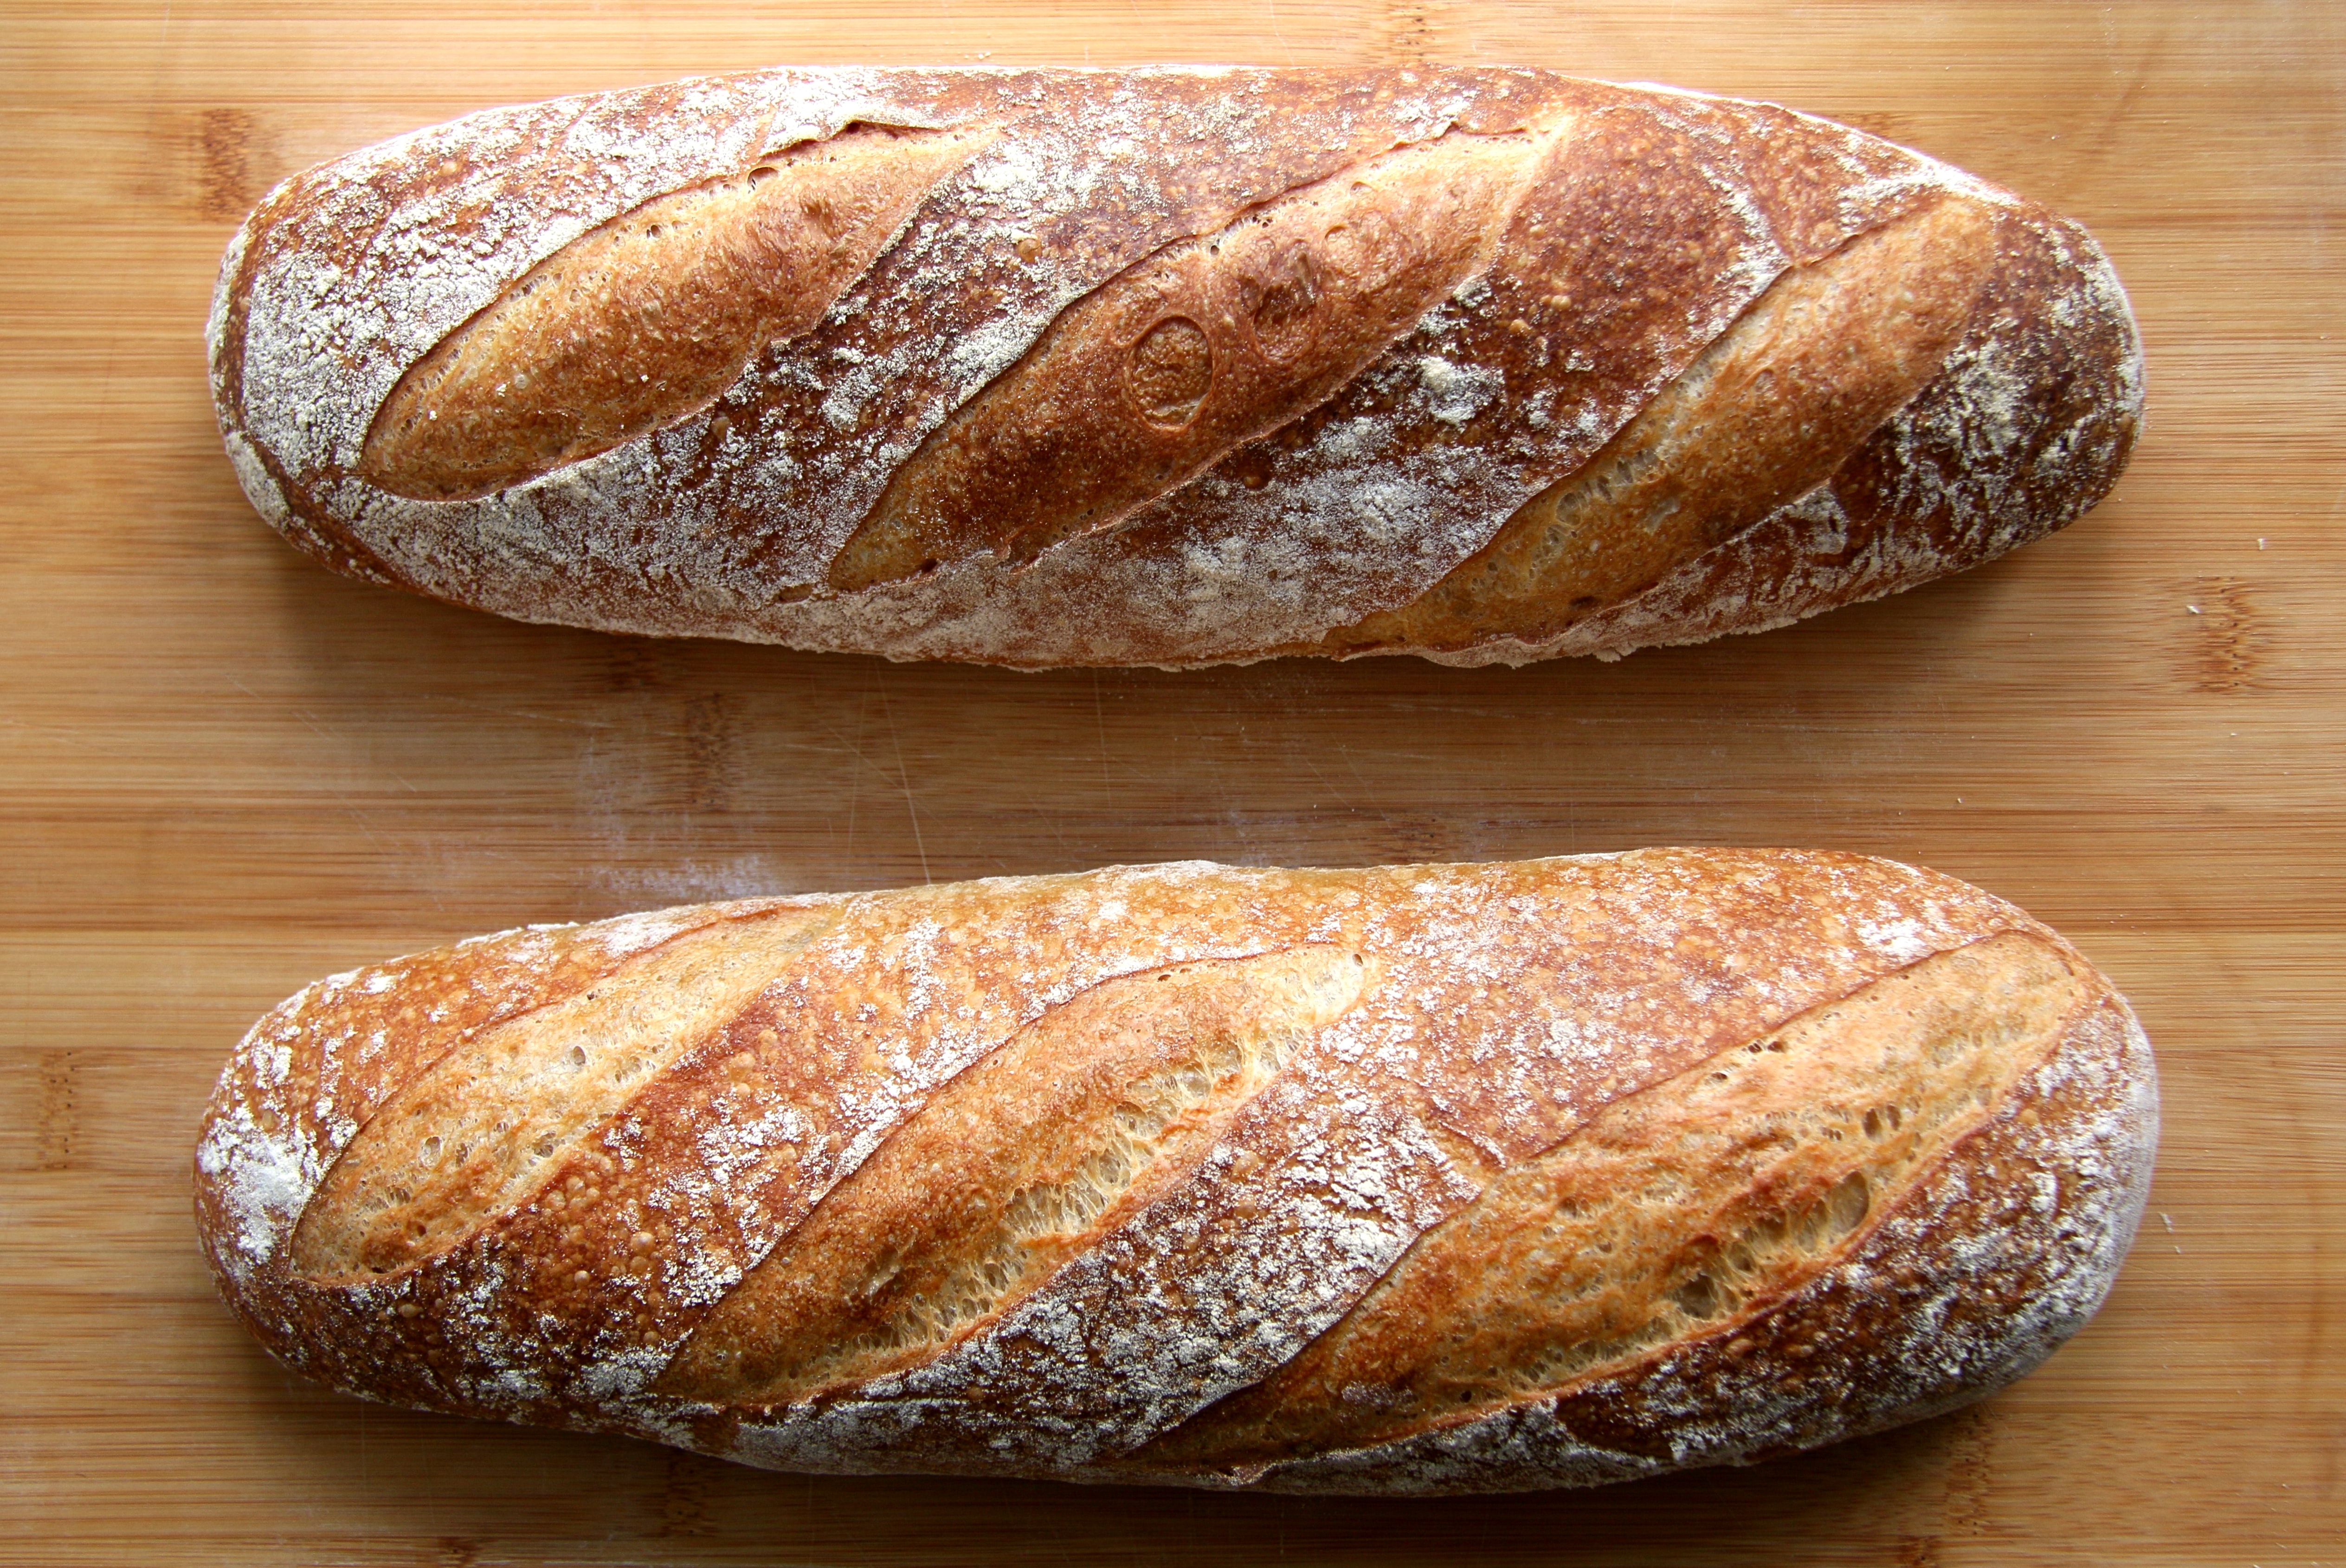 Two freshly baked baguettes